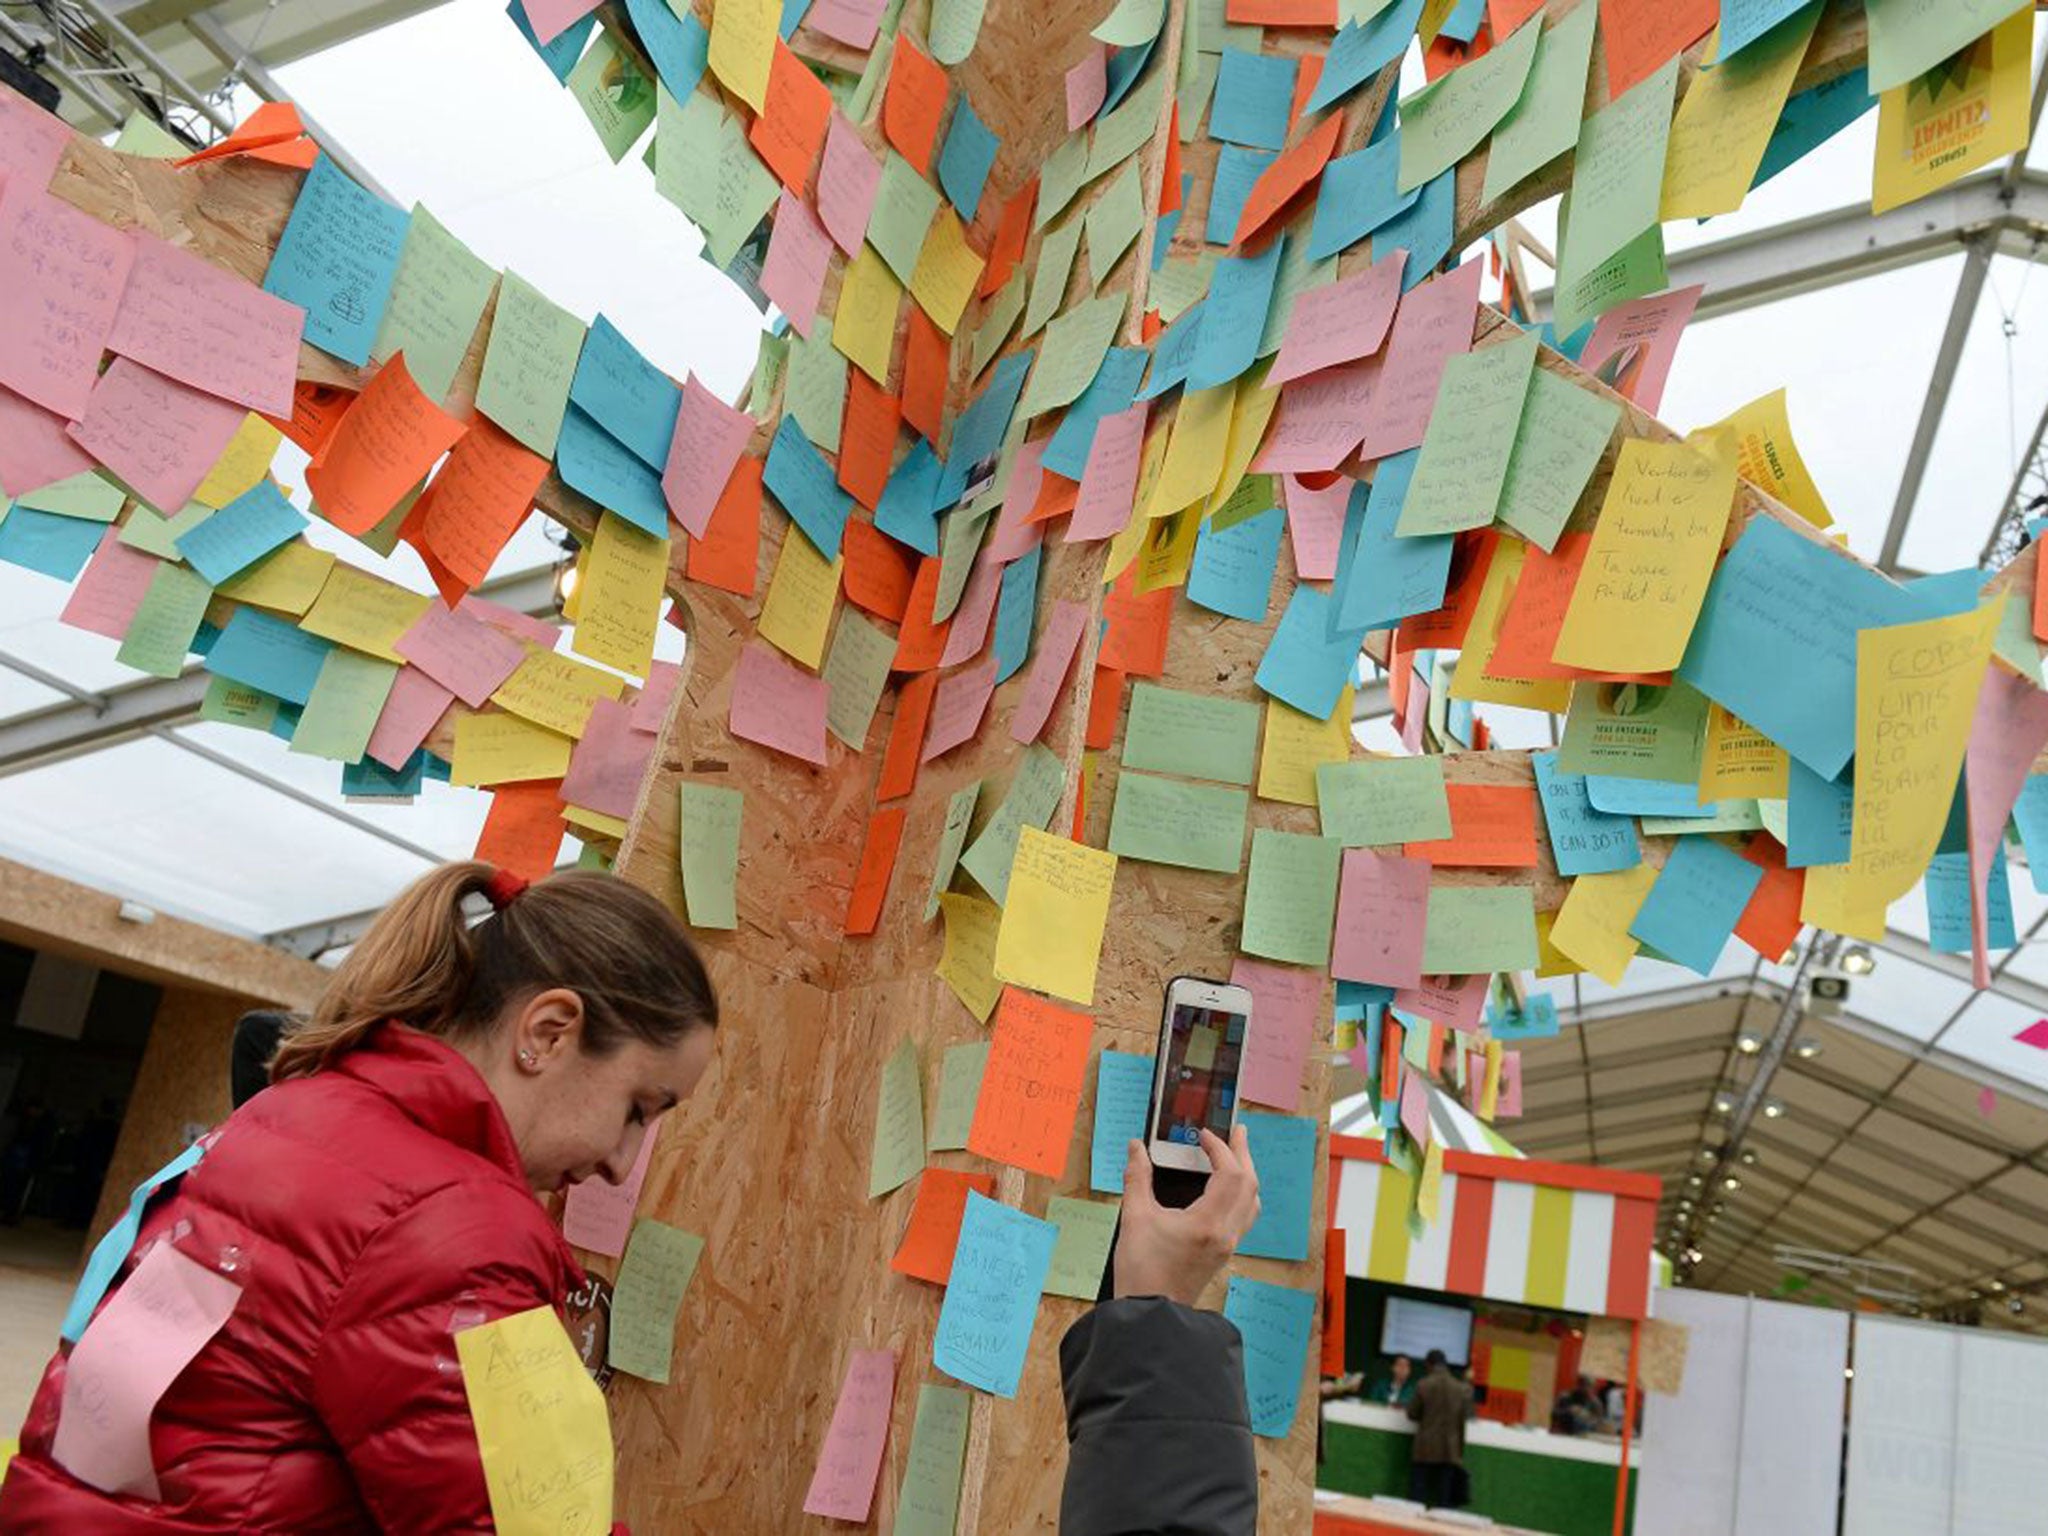 An installation at COP21 called the "solutions tree", where people are invited to post ideas and solutions to problems posed by climate change